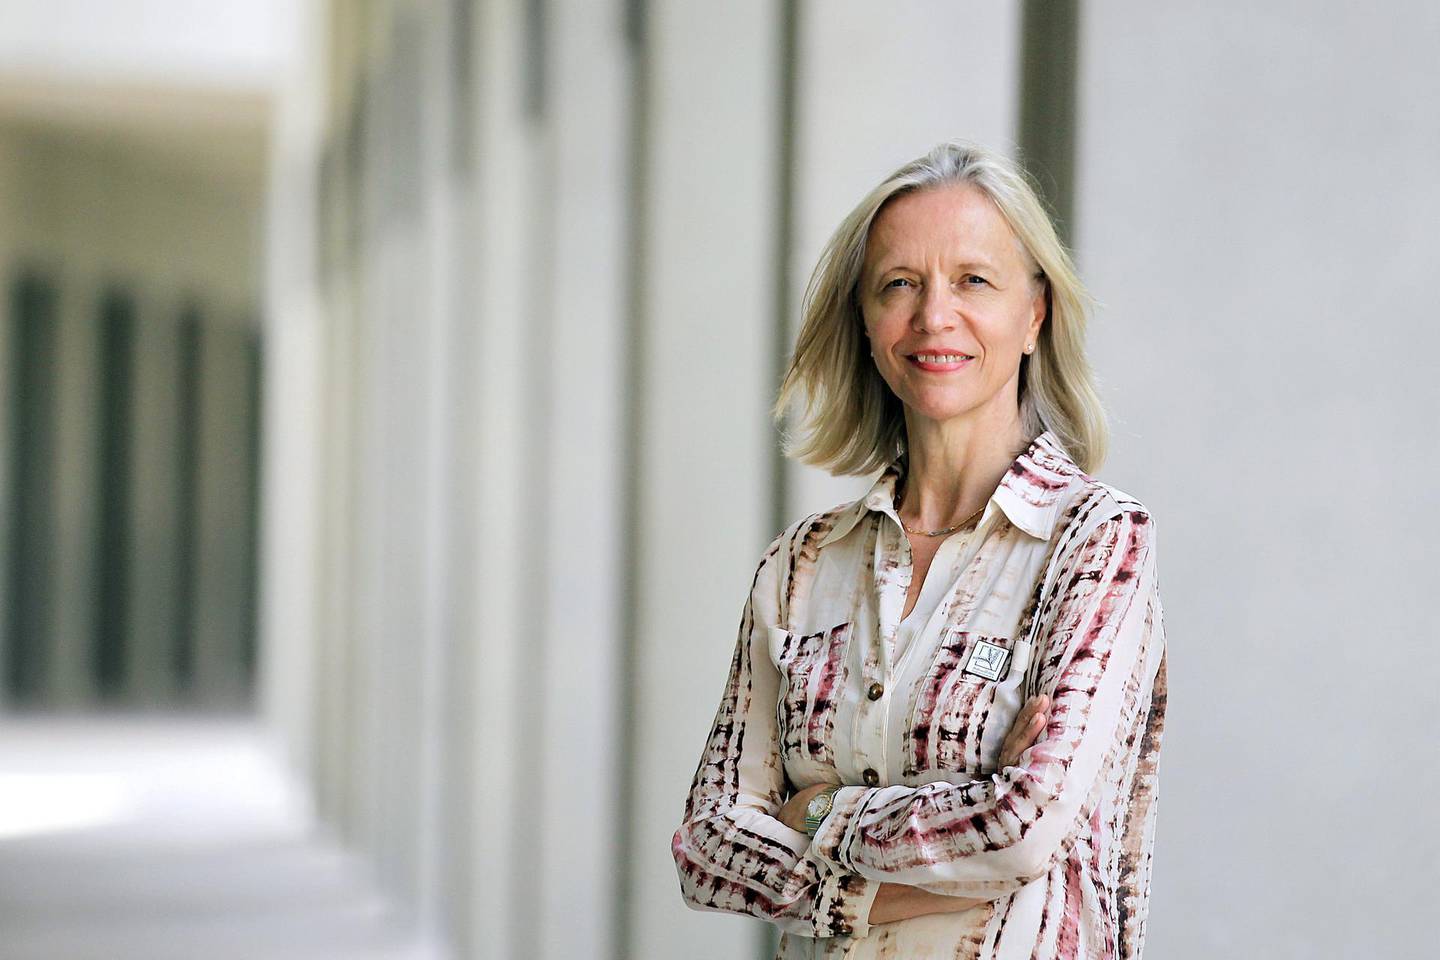 Abu Dhabi, October 10, 2019: Mariet Westermann, the new Vice-Chancellor of NYU Abu Dhabi, poses during the interview in Abu Dhabi.  Satish Kumar / For the National